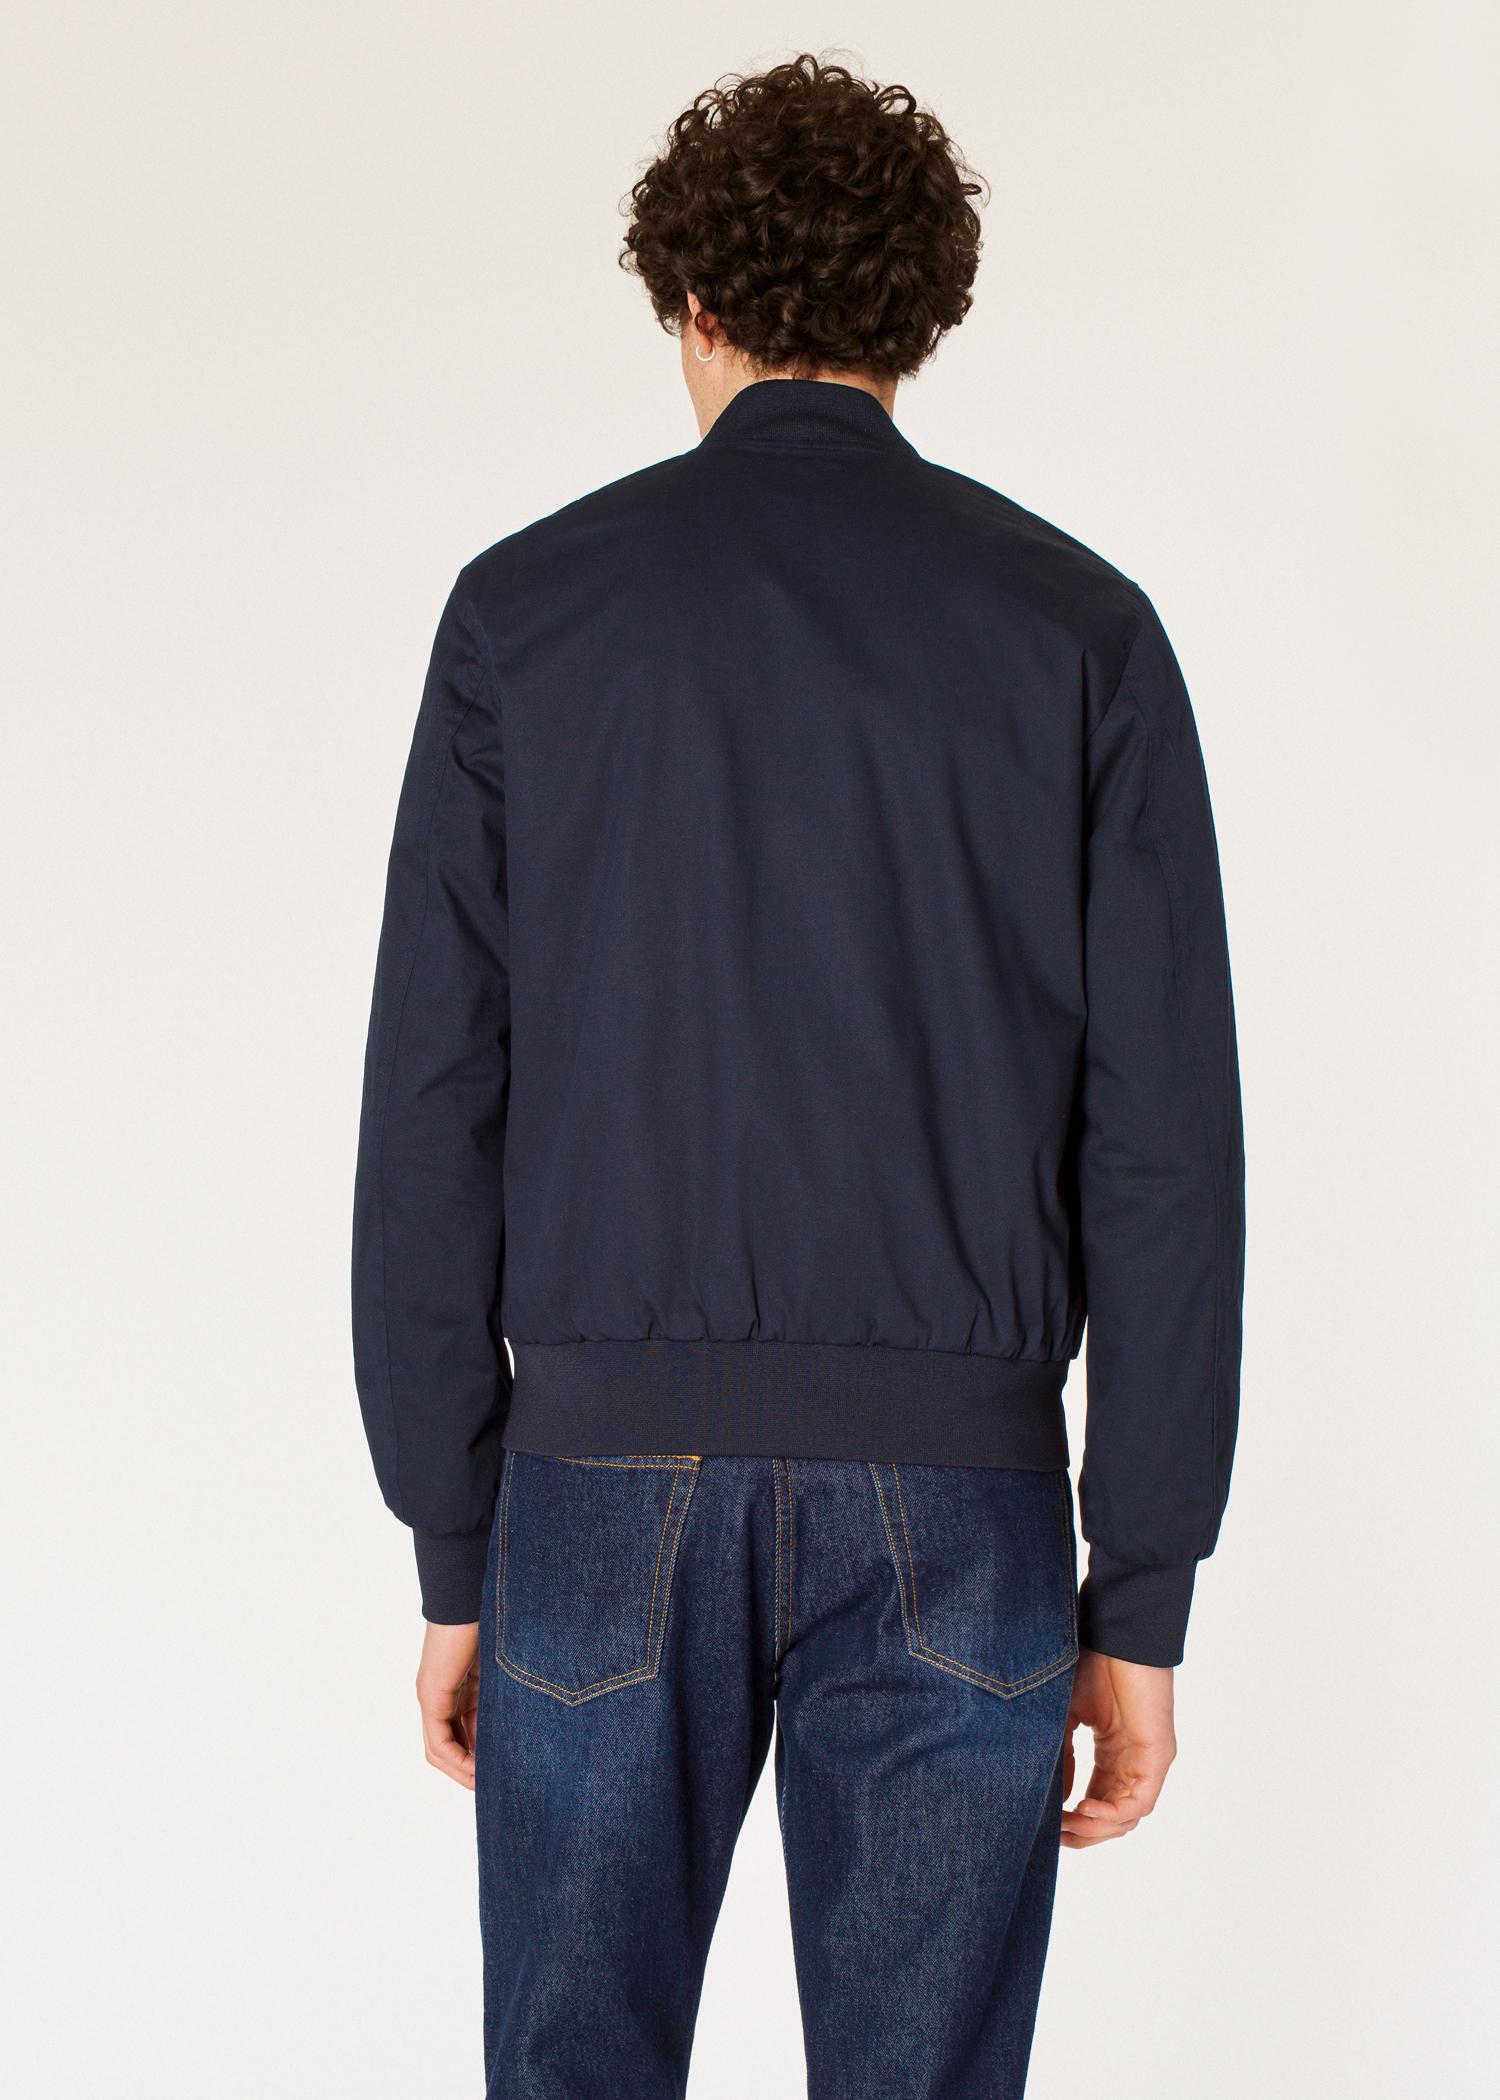 Paul Smith Dark Navy Cotton-blend Bomber Jacket With Chest Pocket in ...